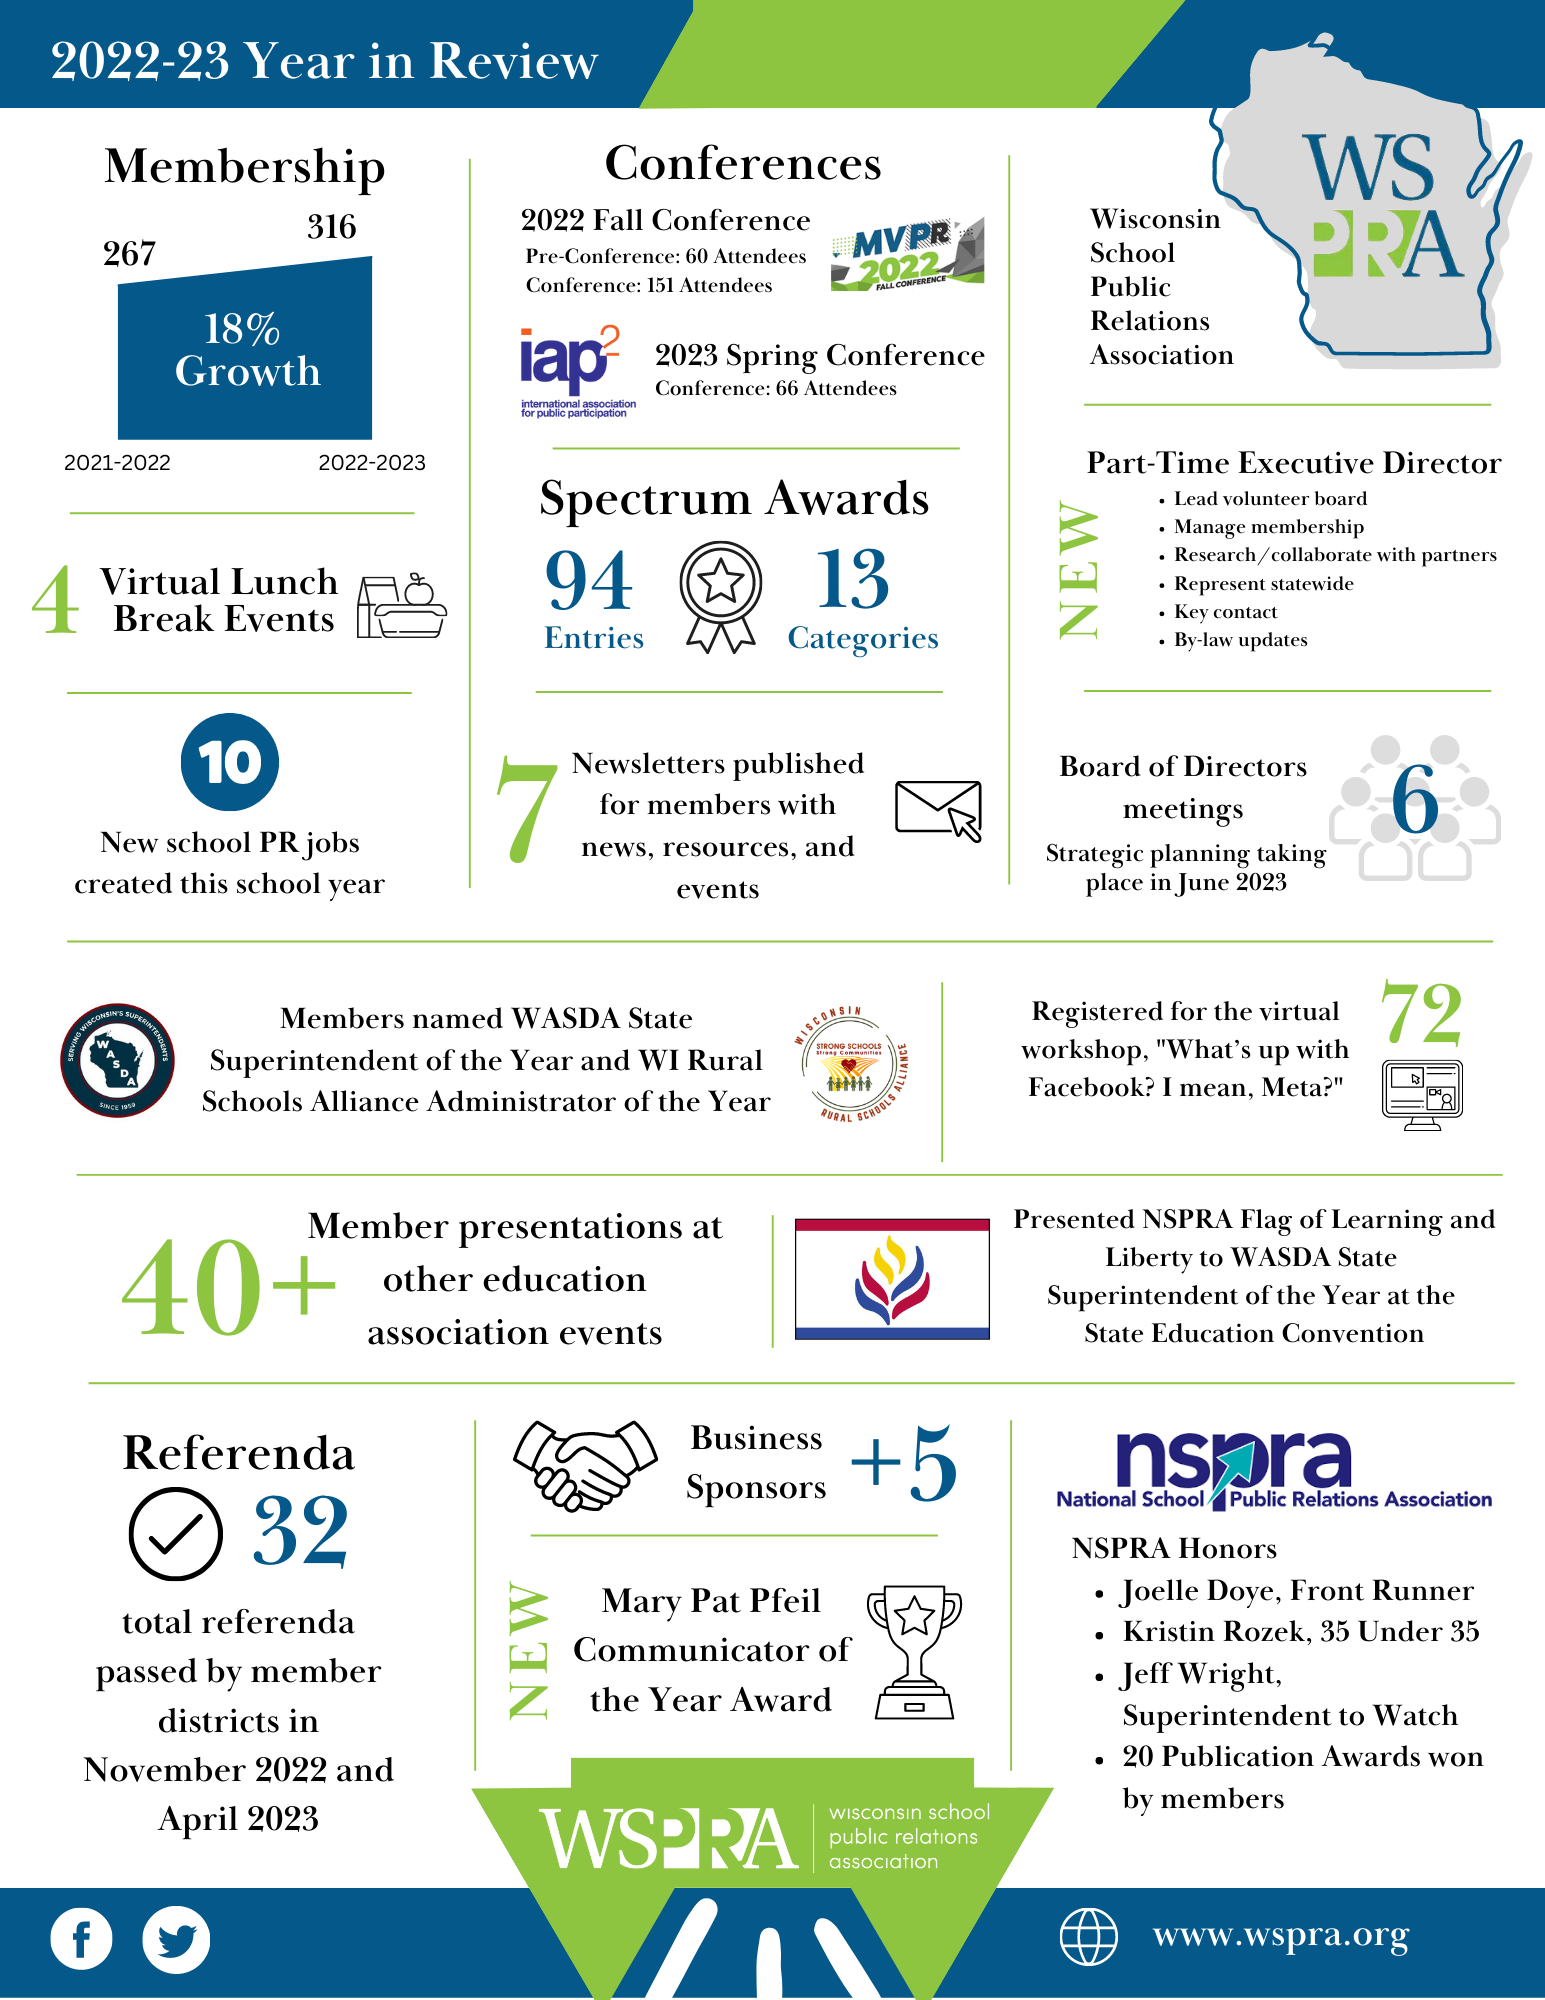 WSPRA Year in Review infographic